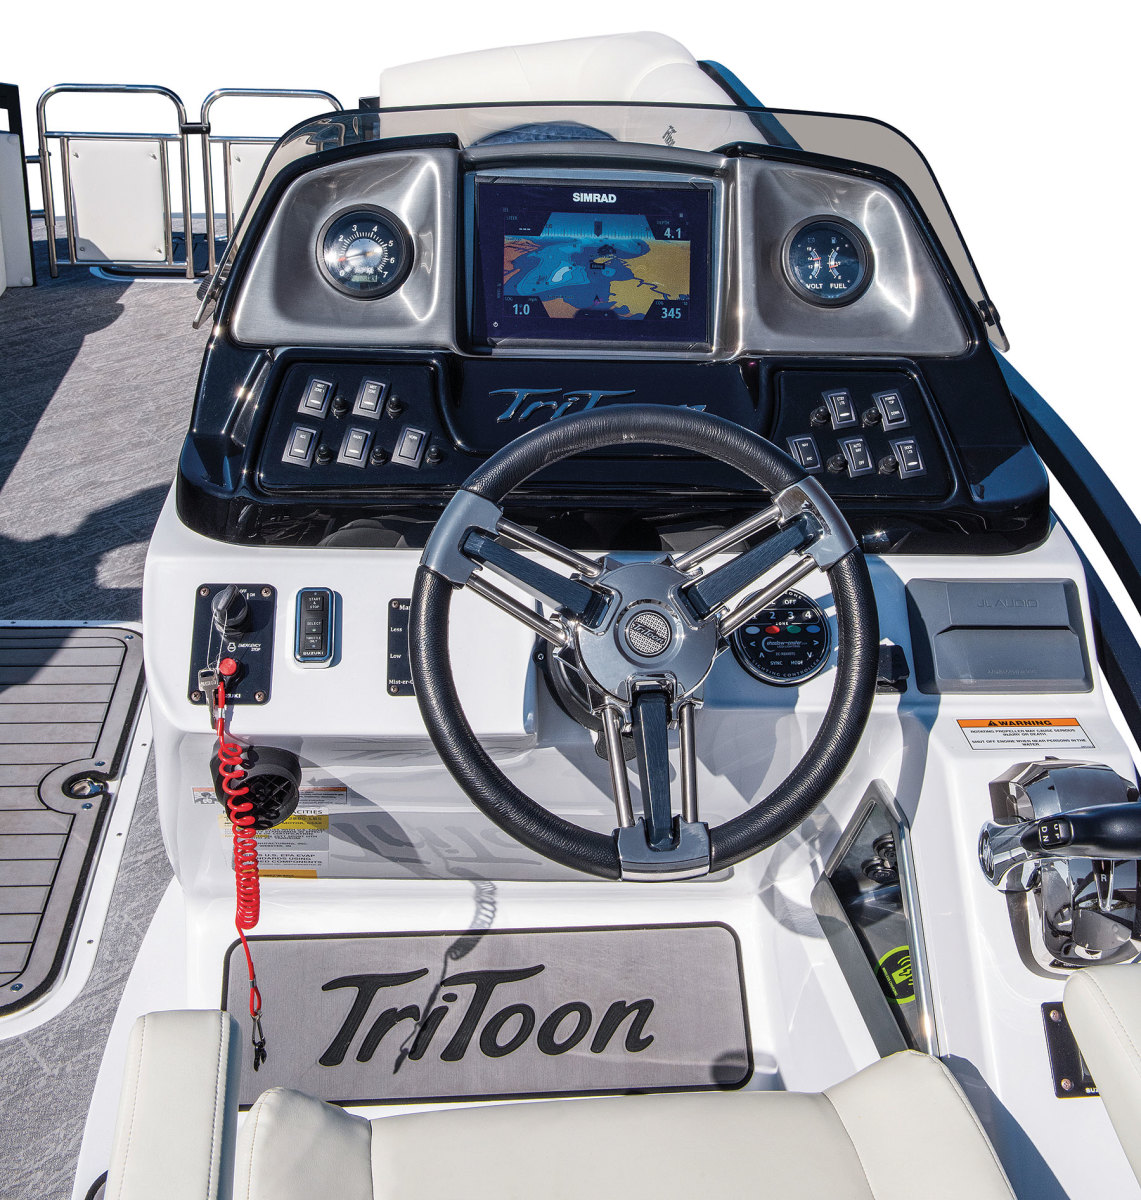 J.C. pontoons cater to customers who want both larger MFDs and analog gauges.